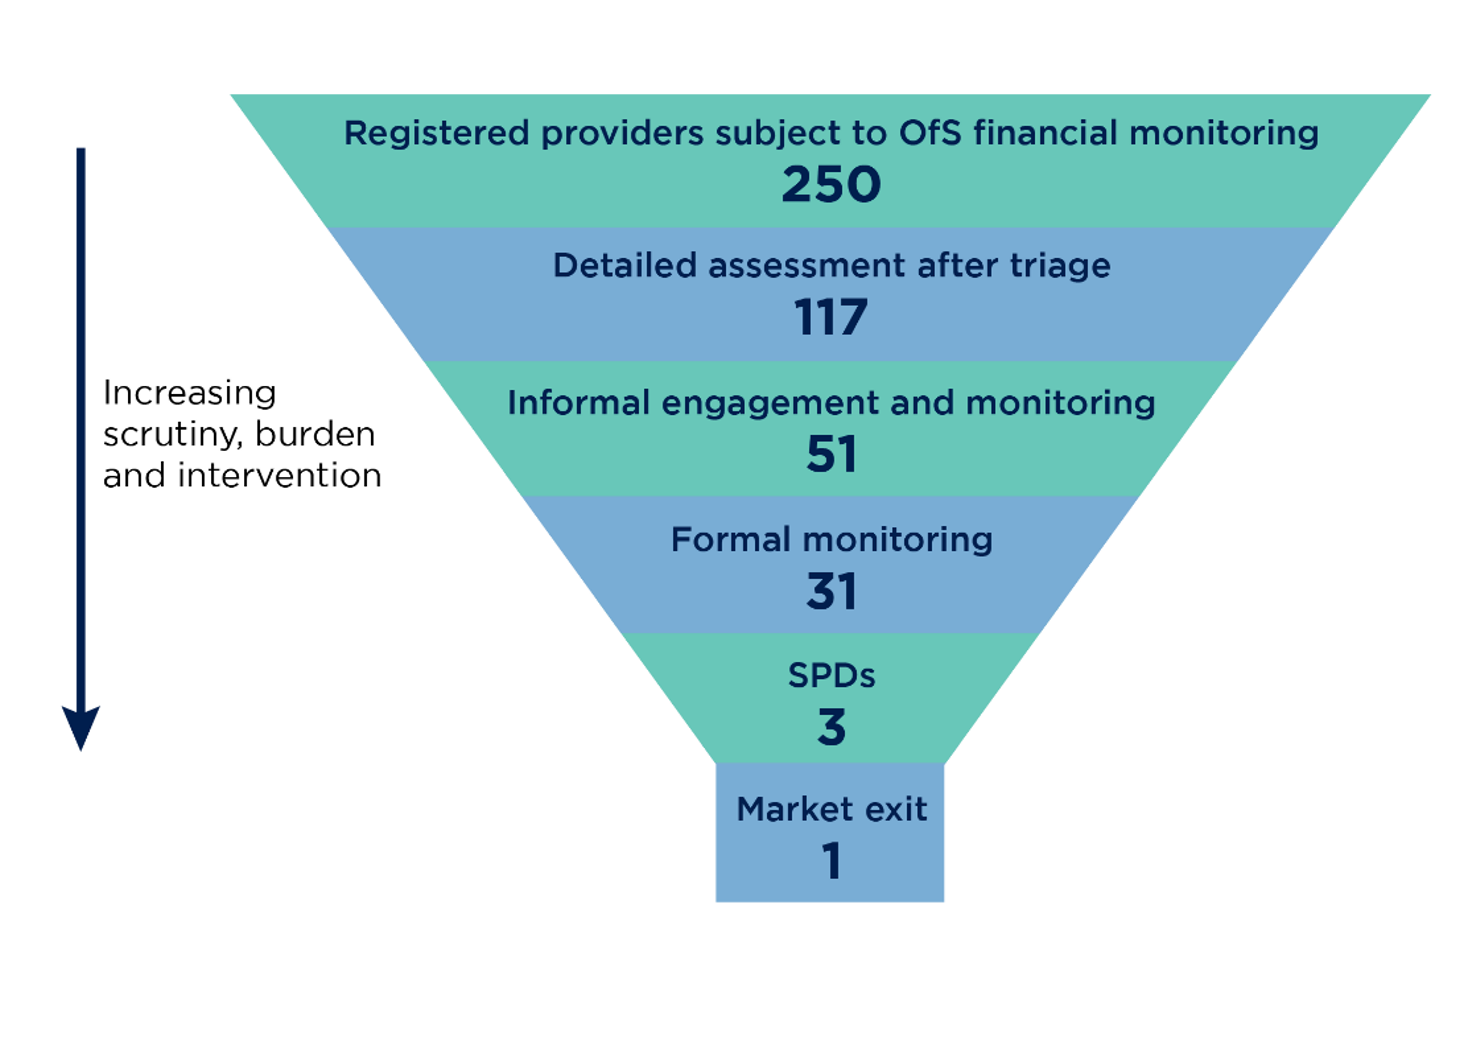 This is a funnel diagram that shows the numbers of providers at each stage of the financial sustainability monitoring process, based on the annual financial return for 2021. At each stage in the funnel, providers are subjected to increased scrutiny, burden and intervention.